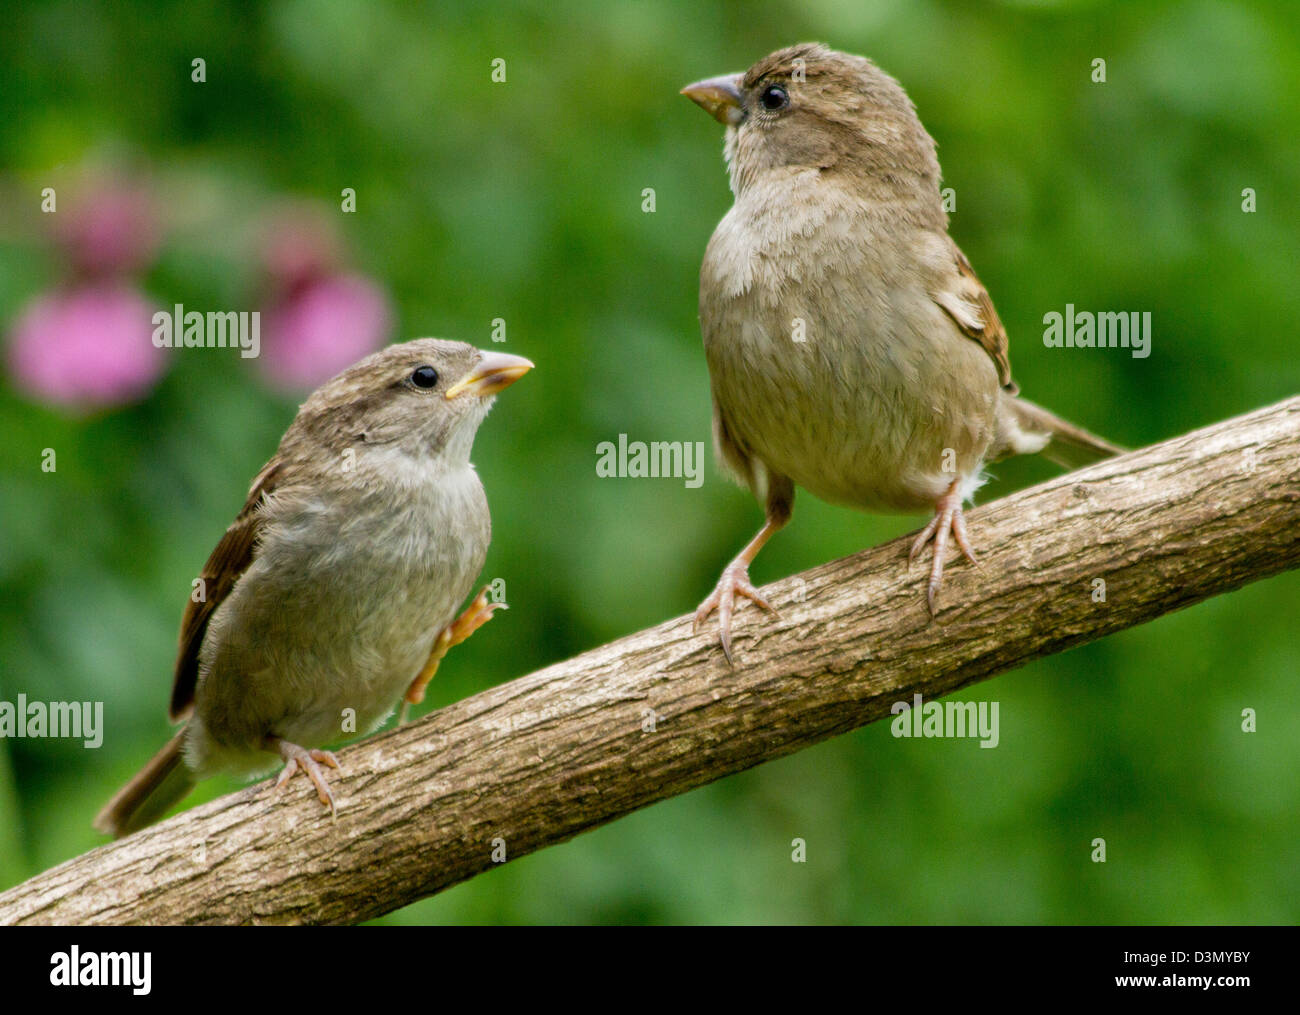 Juvenile House Sparrow approaching its mother on a branch of a tree as it waits to be fed Stock Photo